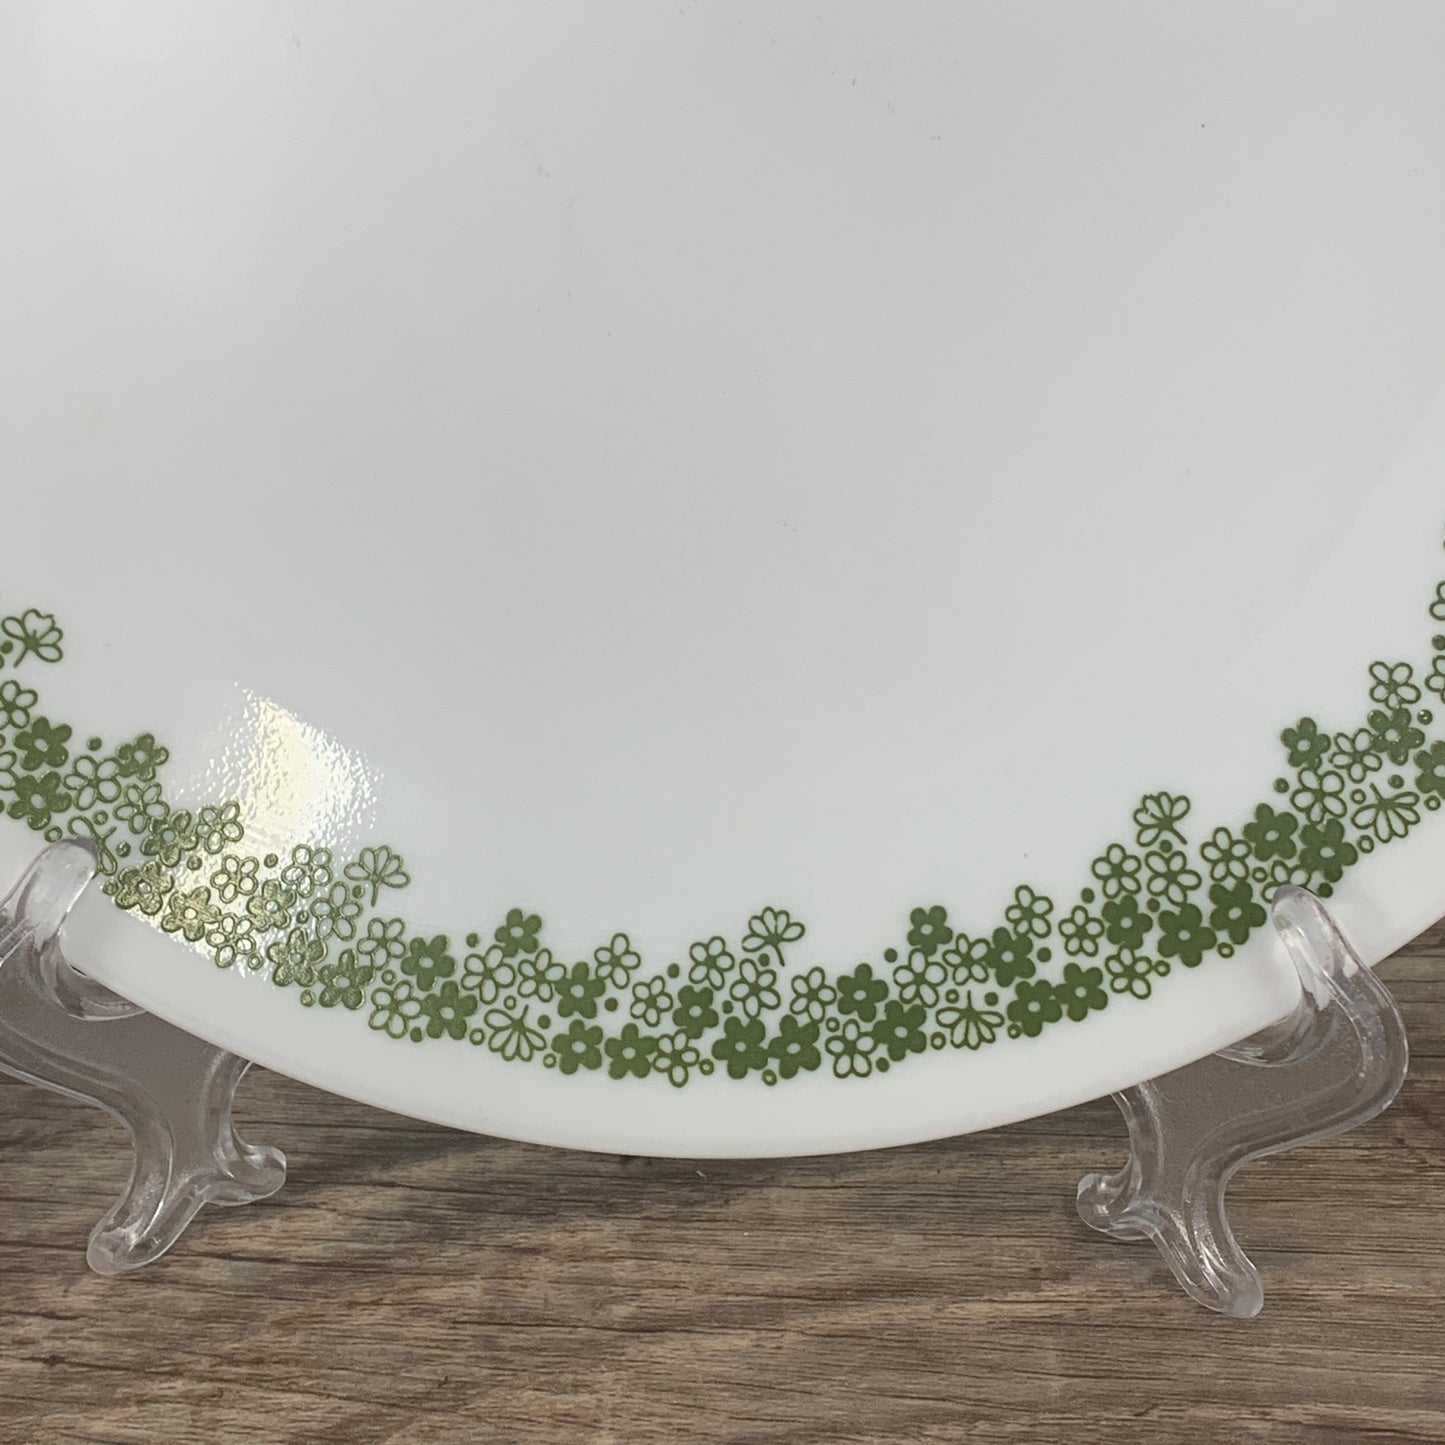 Corelle Salad Plate Spring Blossom Pattern Crazy Daisy Plate Salad Green and White Flowers